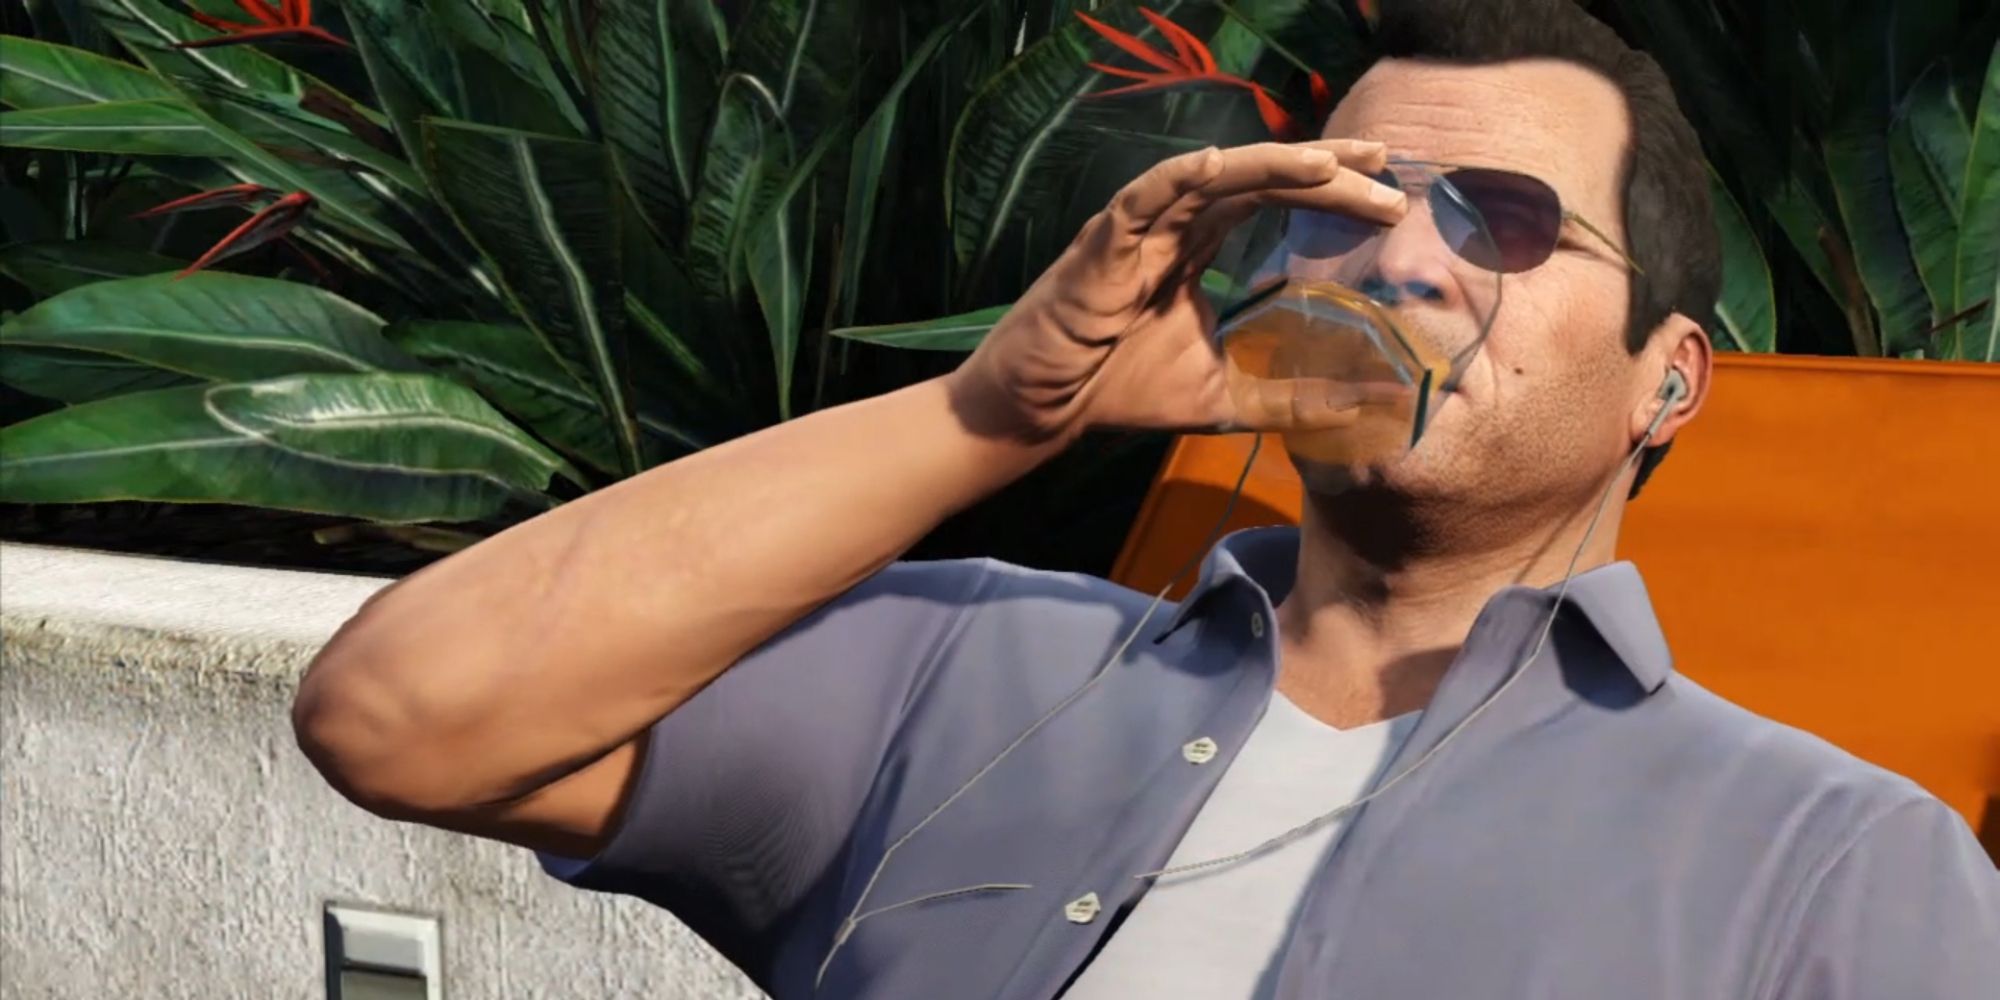 Grand Theft Auto 5 Screenshot Of Michael Drinking By Pool